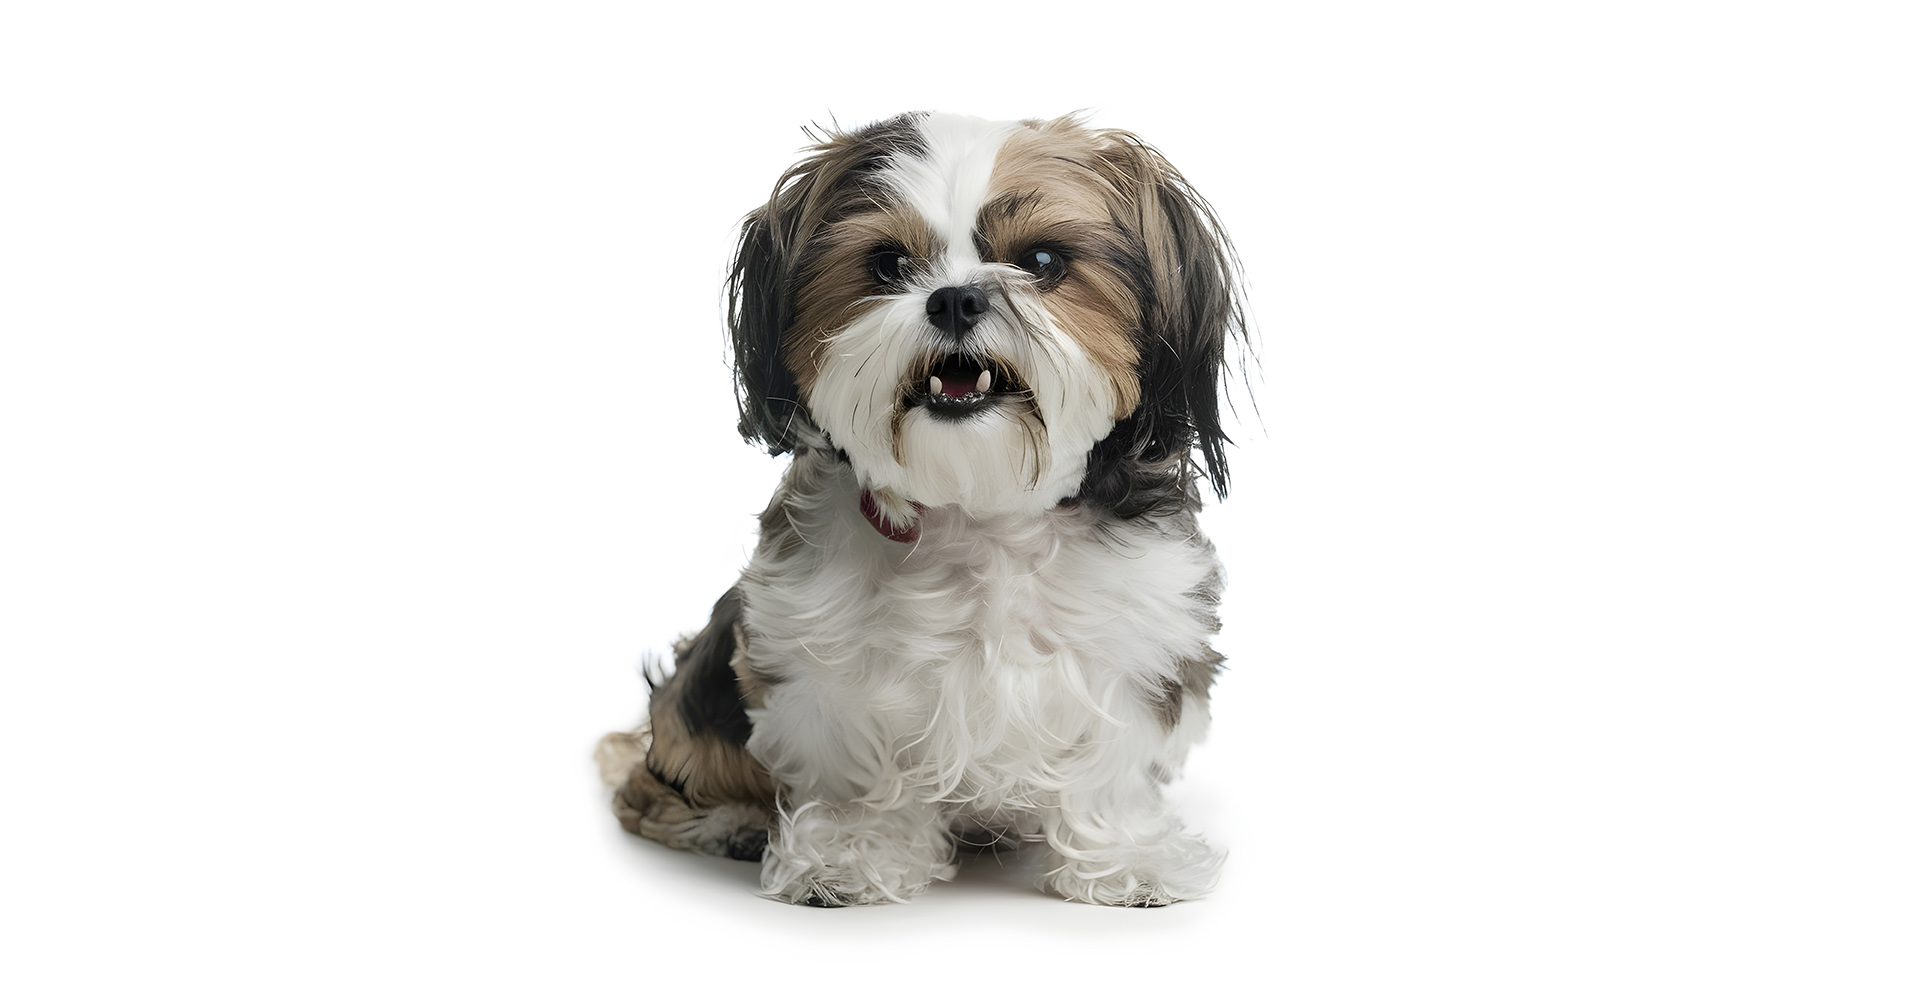 Imperial Shih Tzu for Sale